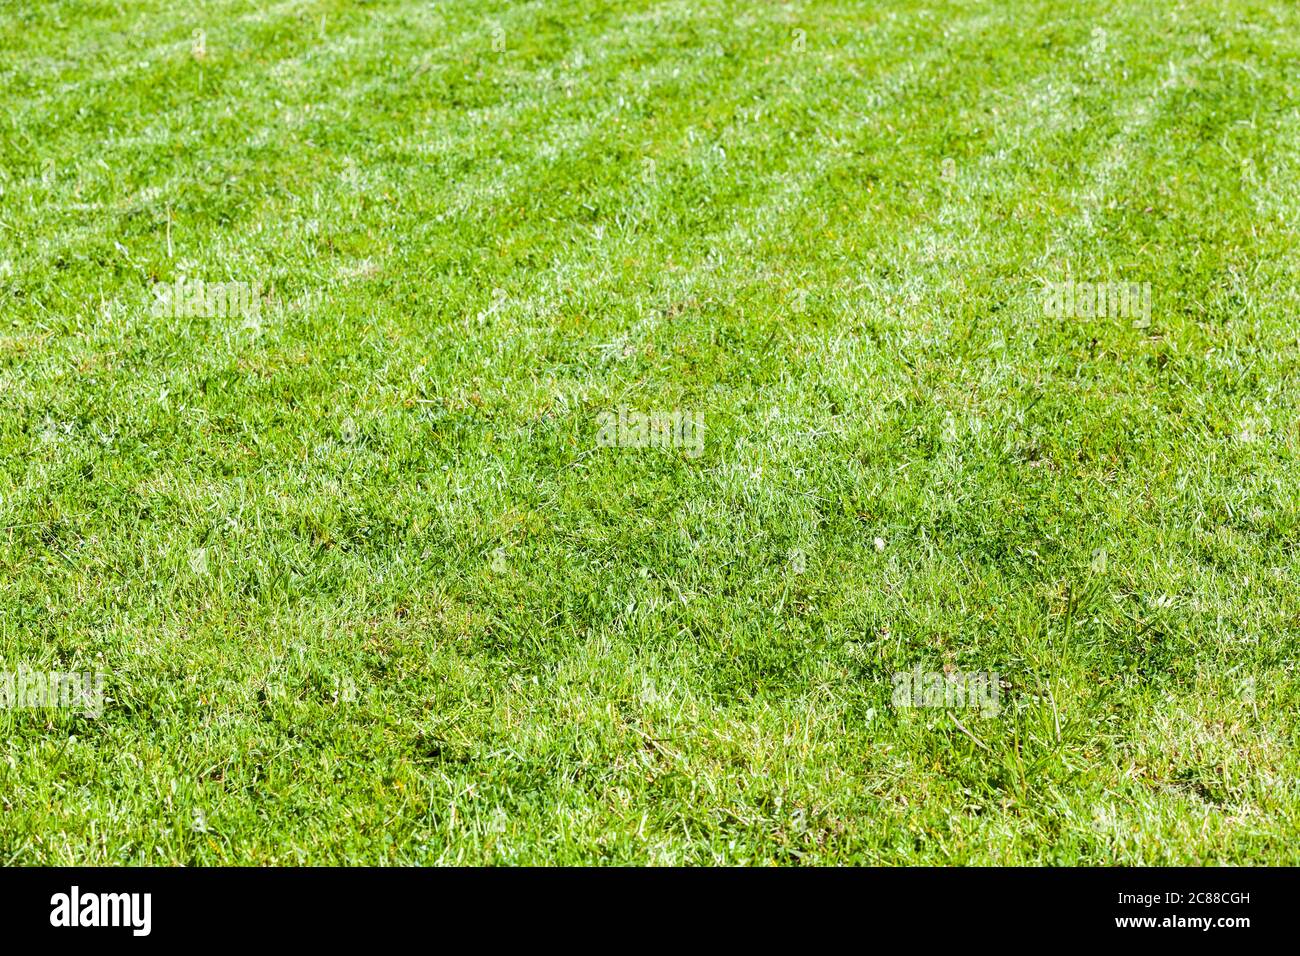 Trimmed lawn at summer sunny day, fresh green grass background photo Stock Photo